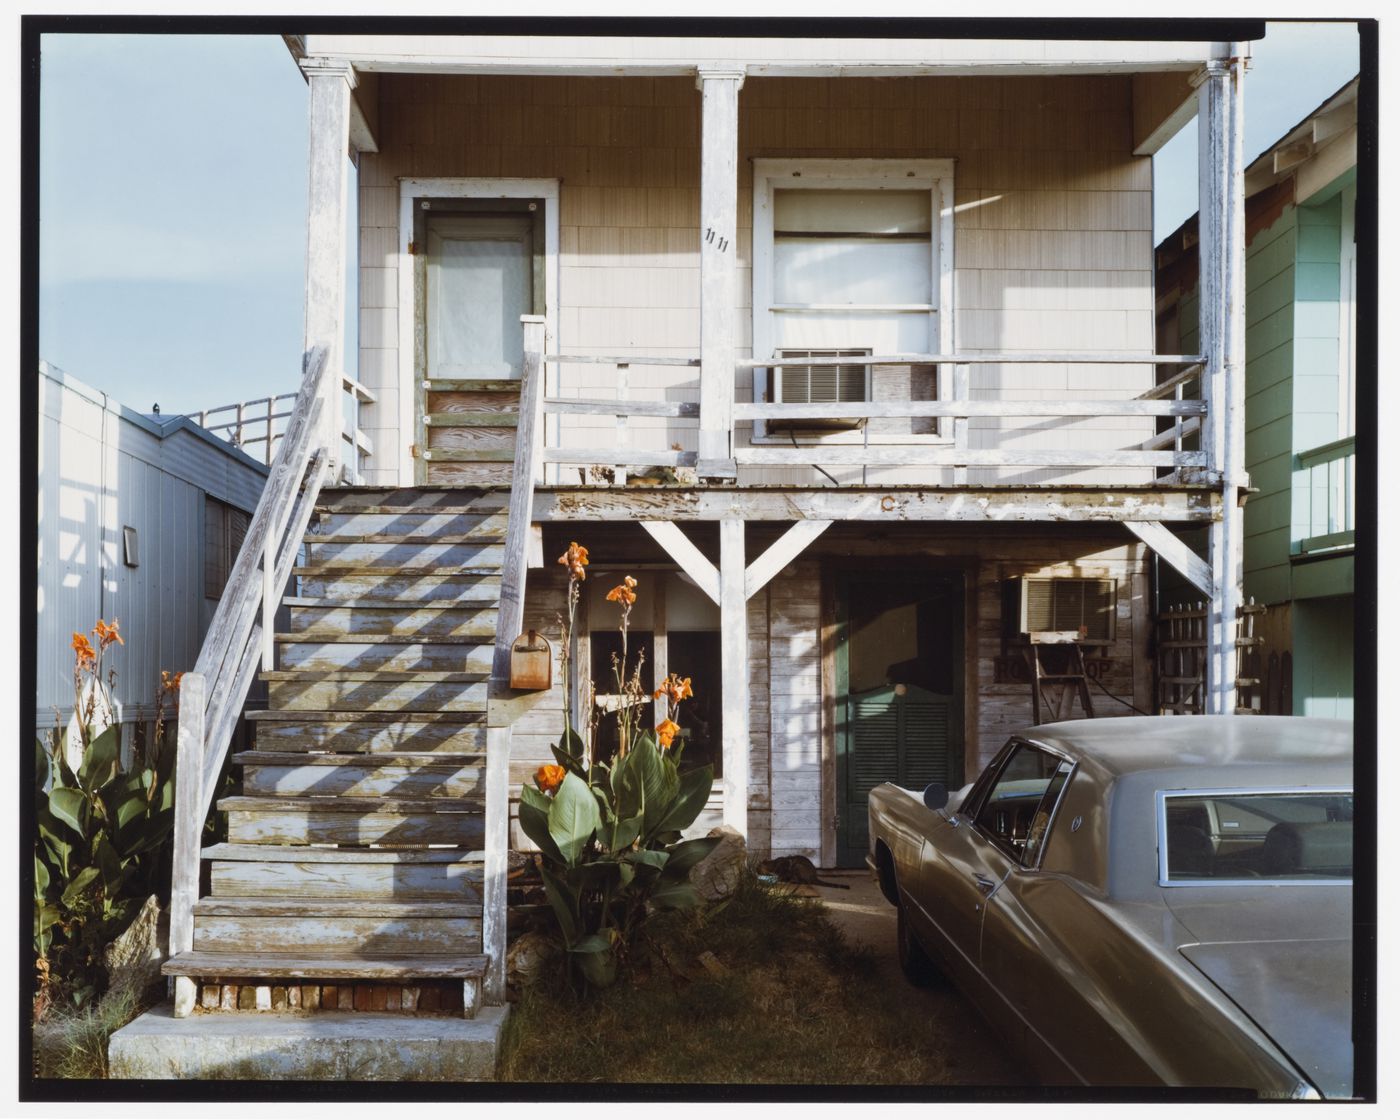 View of house with stairs leading up to a porch, flowering plants and a car, M 1/2 Ave., Galveston, Texas